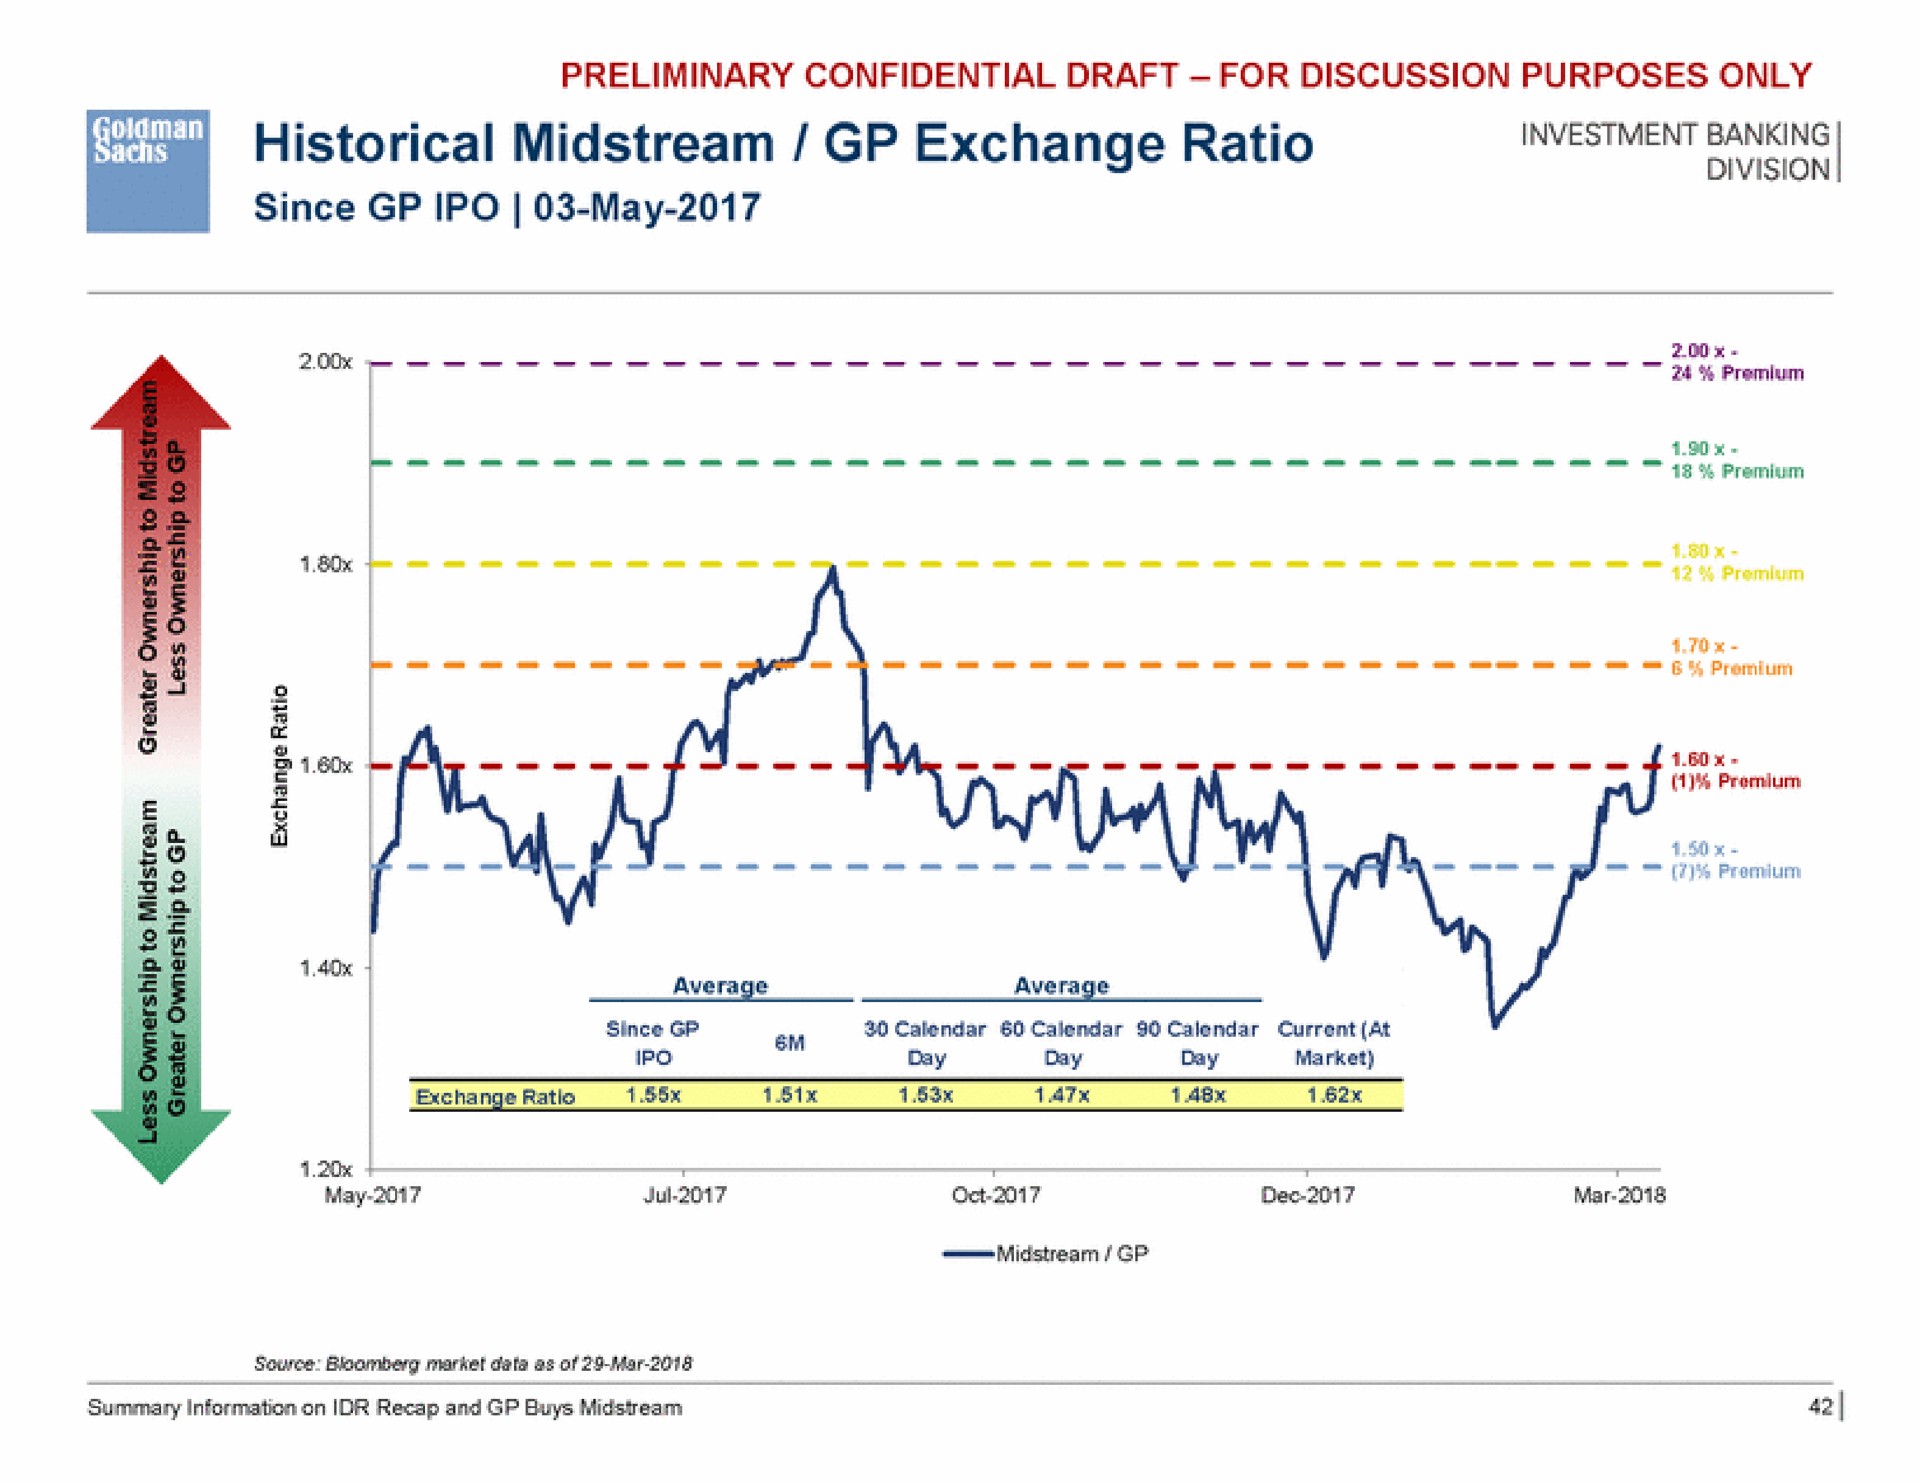 investment banking historical midstream exchange ratio since may | Goldman Sachs